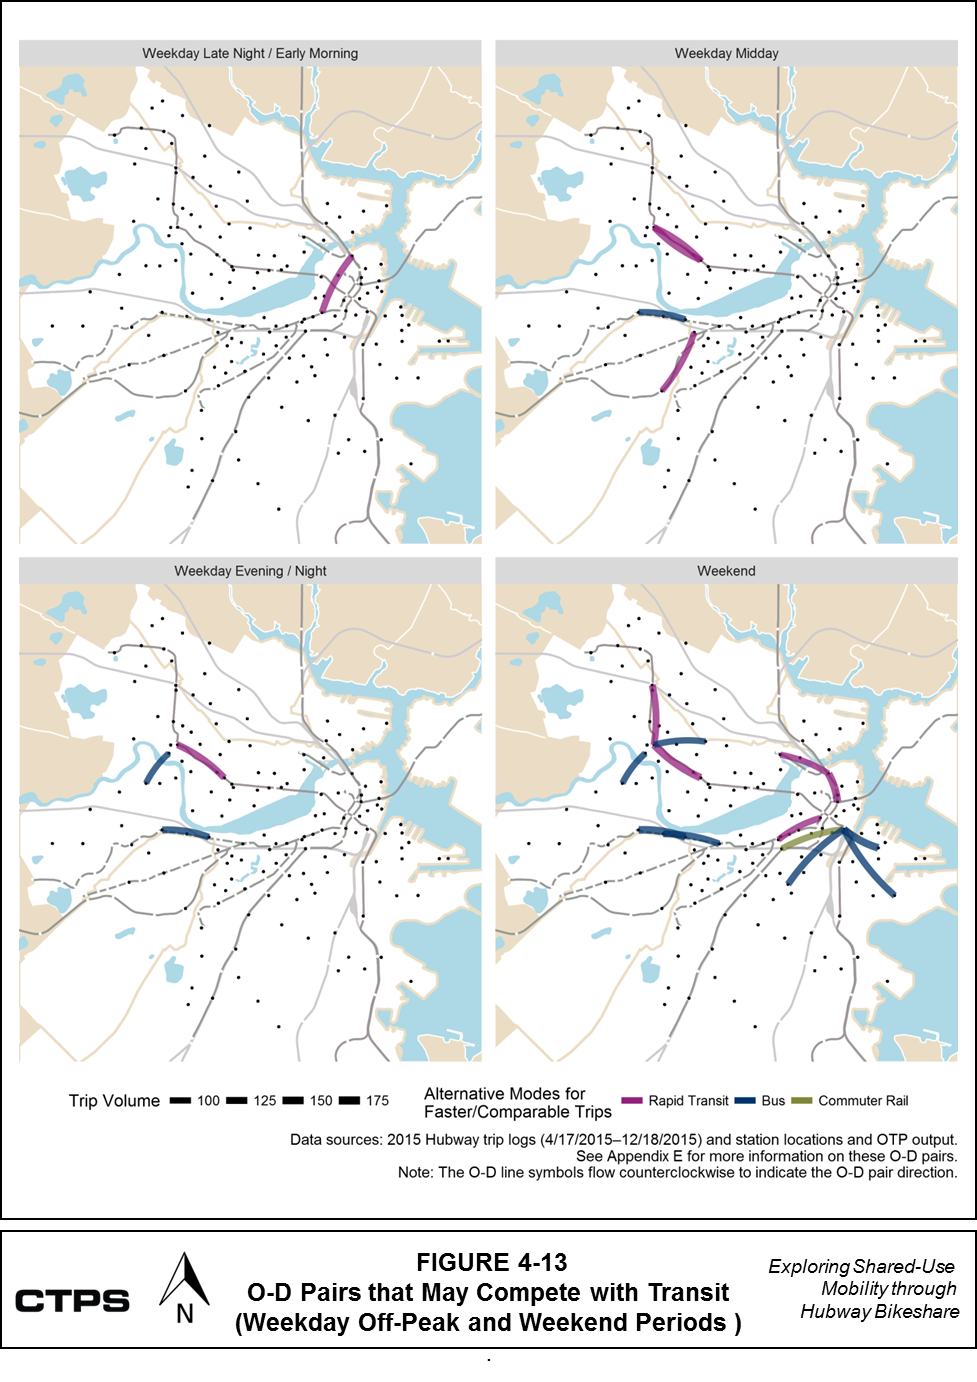 FIGURE 4-13: O-D Pairs that May Complement or Compete with Transit (Weekday Off-Peak and Weekend Periods): This series of four maps shows origin-destination (O-D) pairs of Hubway member trips. The first shows O-D pairs during the weekday late night/early morning period, the second shows O-D pairs during the weekday midday period, the third shows O-D pairs during the weekday evening/night period, and the fourth shows O-D pairs during weekend days. . These O-D pairs are classified according to their trip volume, the relevant modes in the alternate transit itineraries generated by Open Trip Planner (OTP). At least 50 percent of the trips in these pairs were faster or comparable in travel time by transit. More information about these O-D pairs is available in Appendix E.